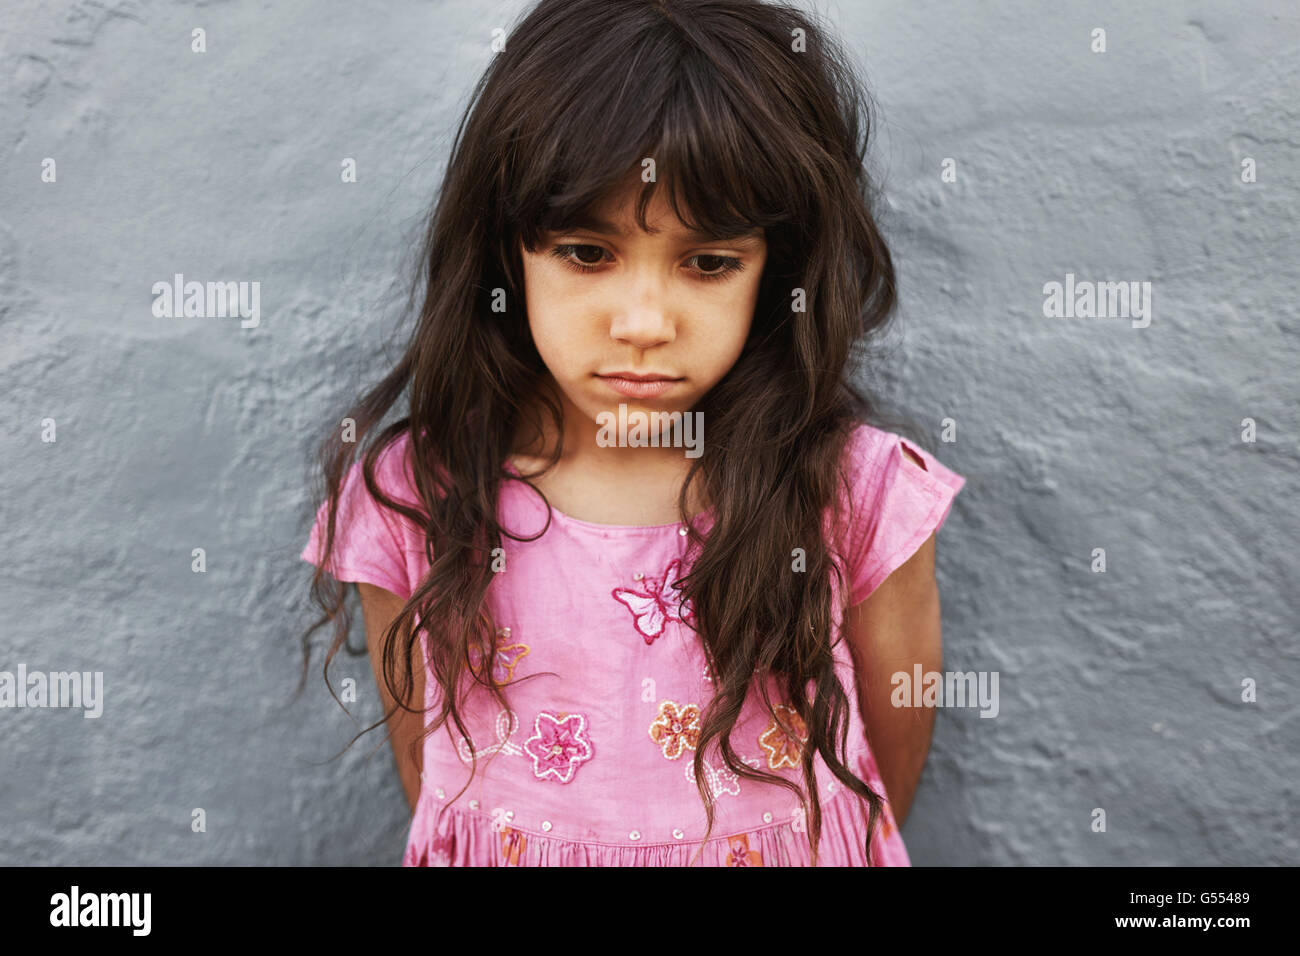 Close up portrait of little girl standing looking upset. Sad young girl standing against a grey wall. Stock Photo